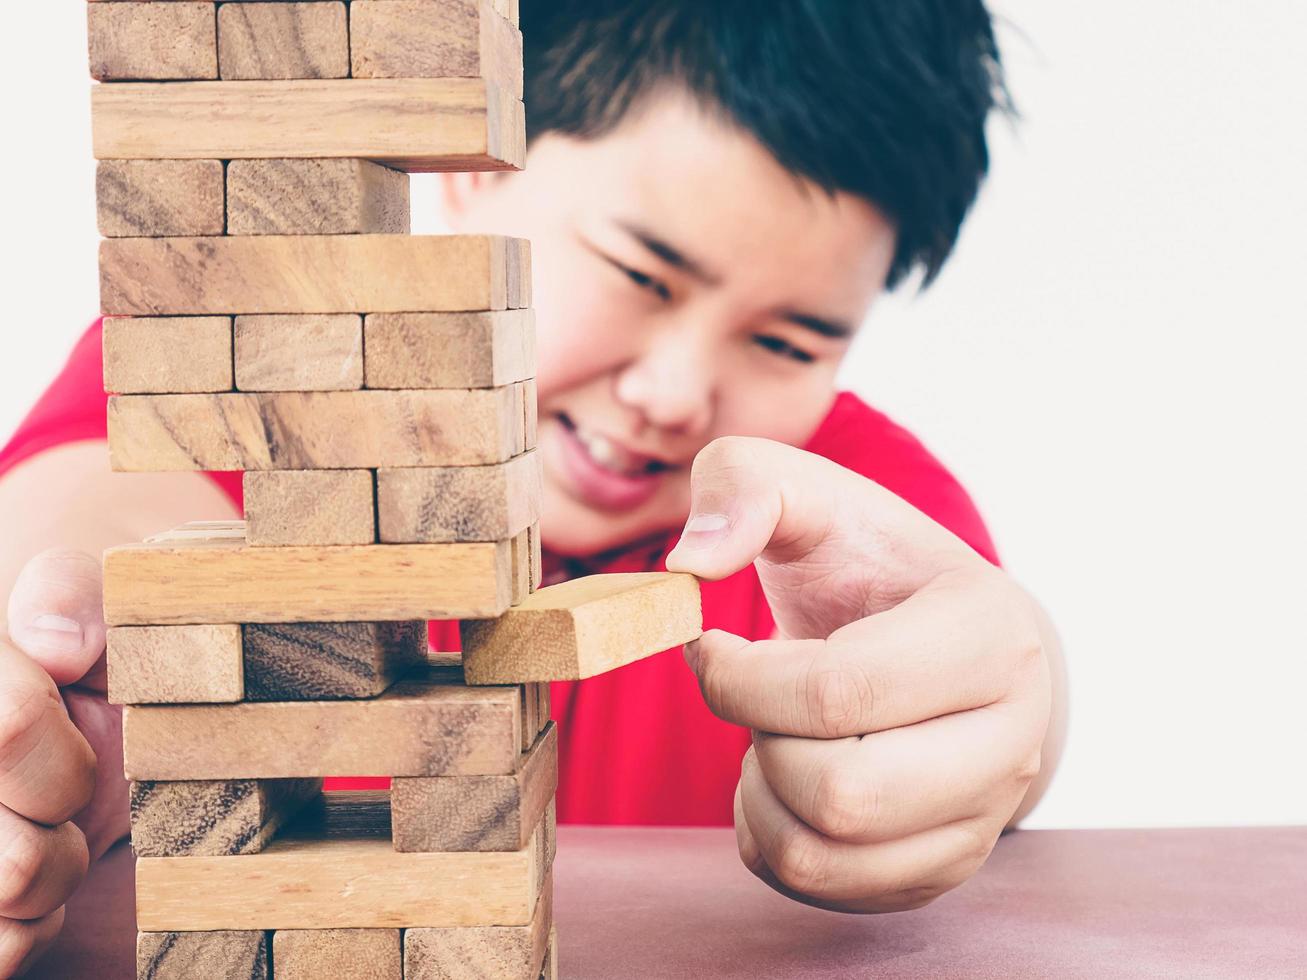 Vintage tone of asian kid is playing wood blocks tower game for practicing physical and mental skill. Photo is focused is hands.